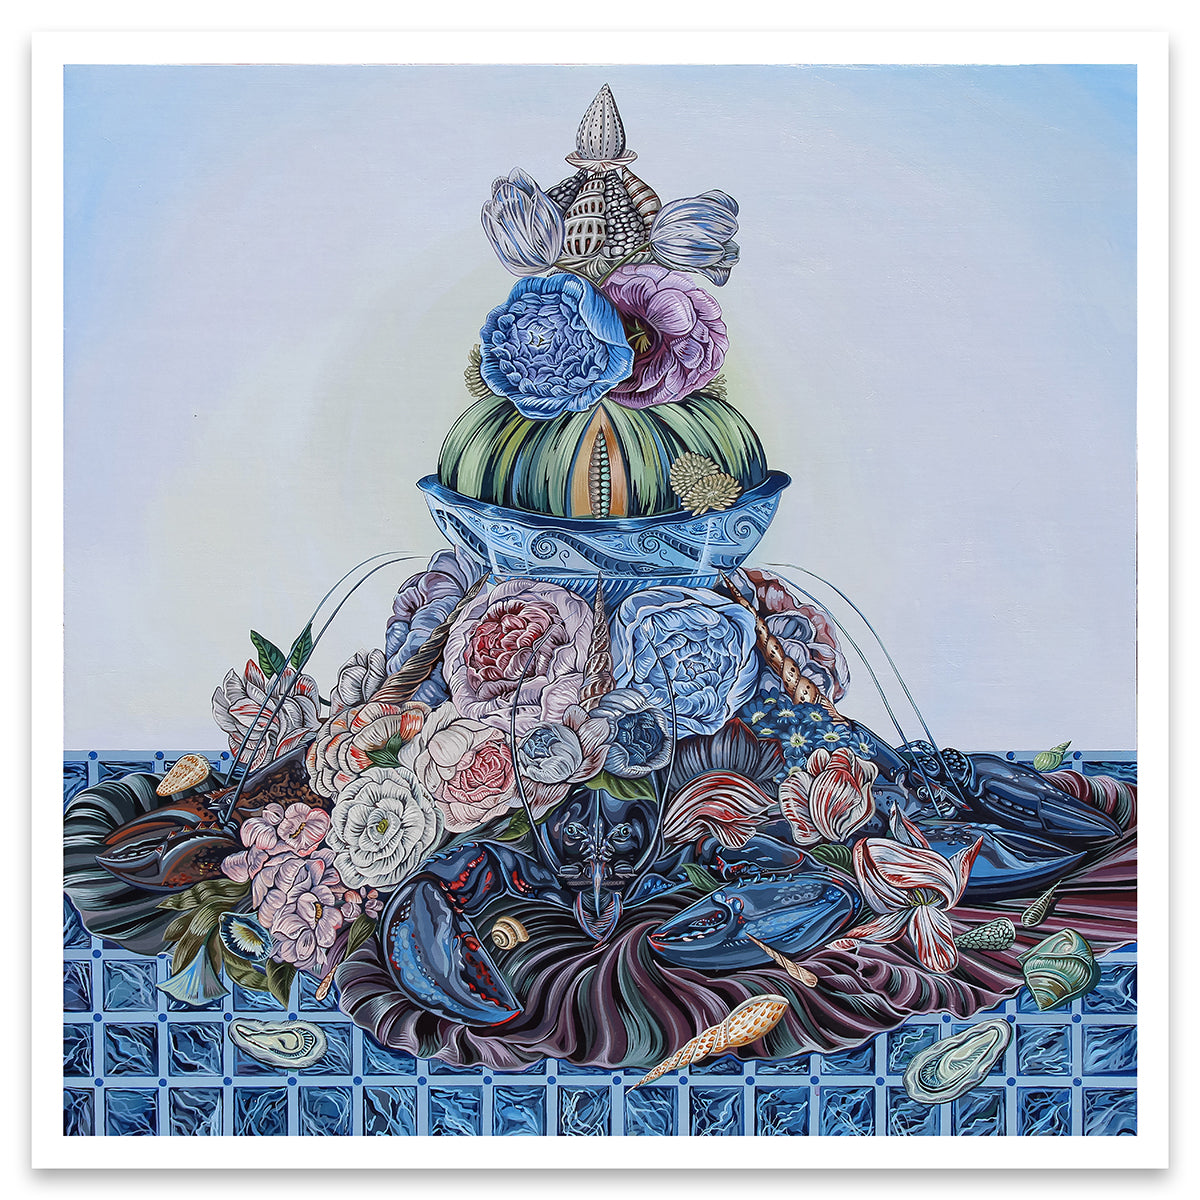 Sabrina Bockler print of feast on table piled up - lobsters, florals, melons, etc